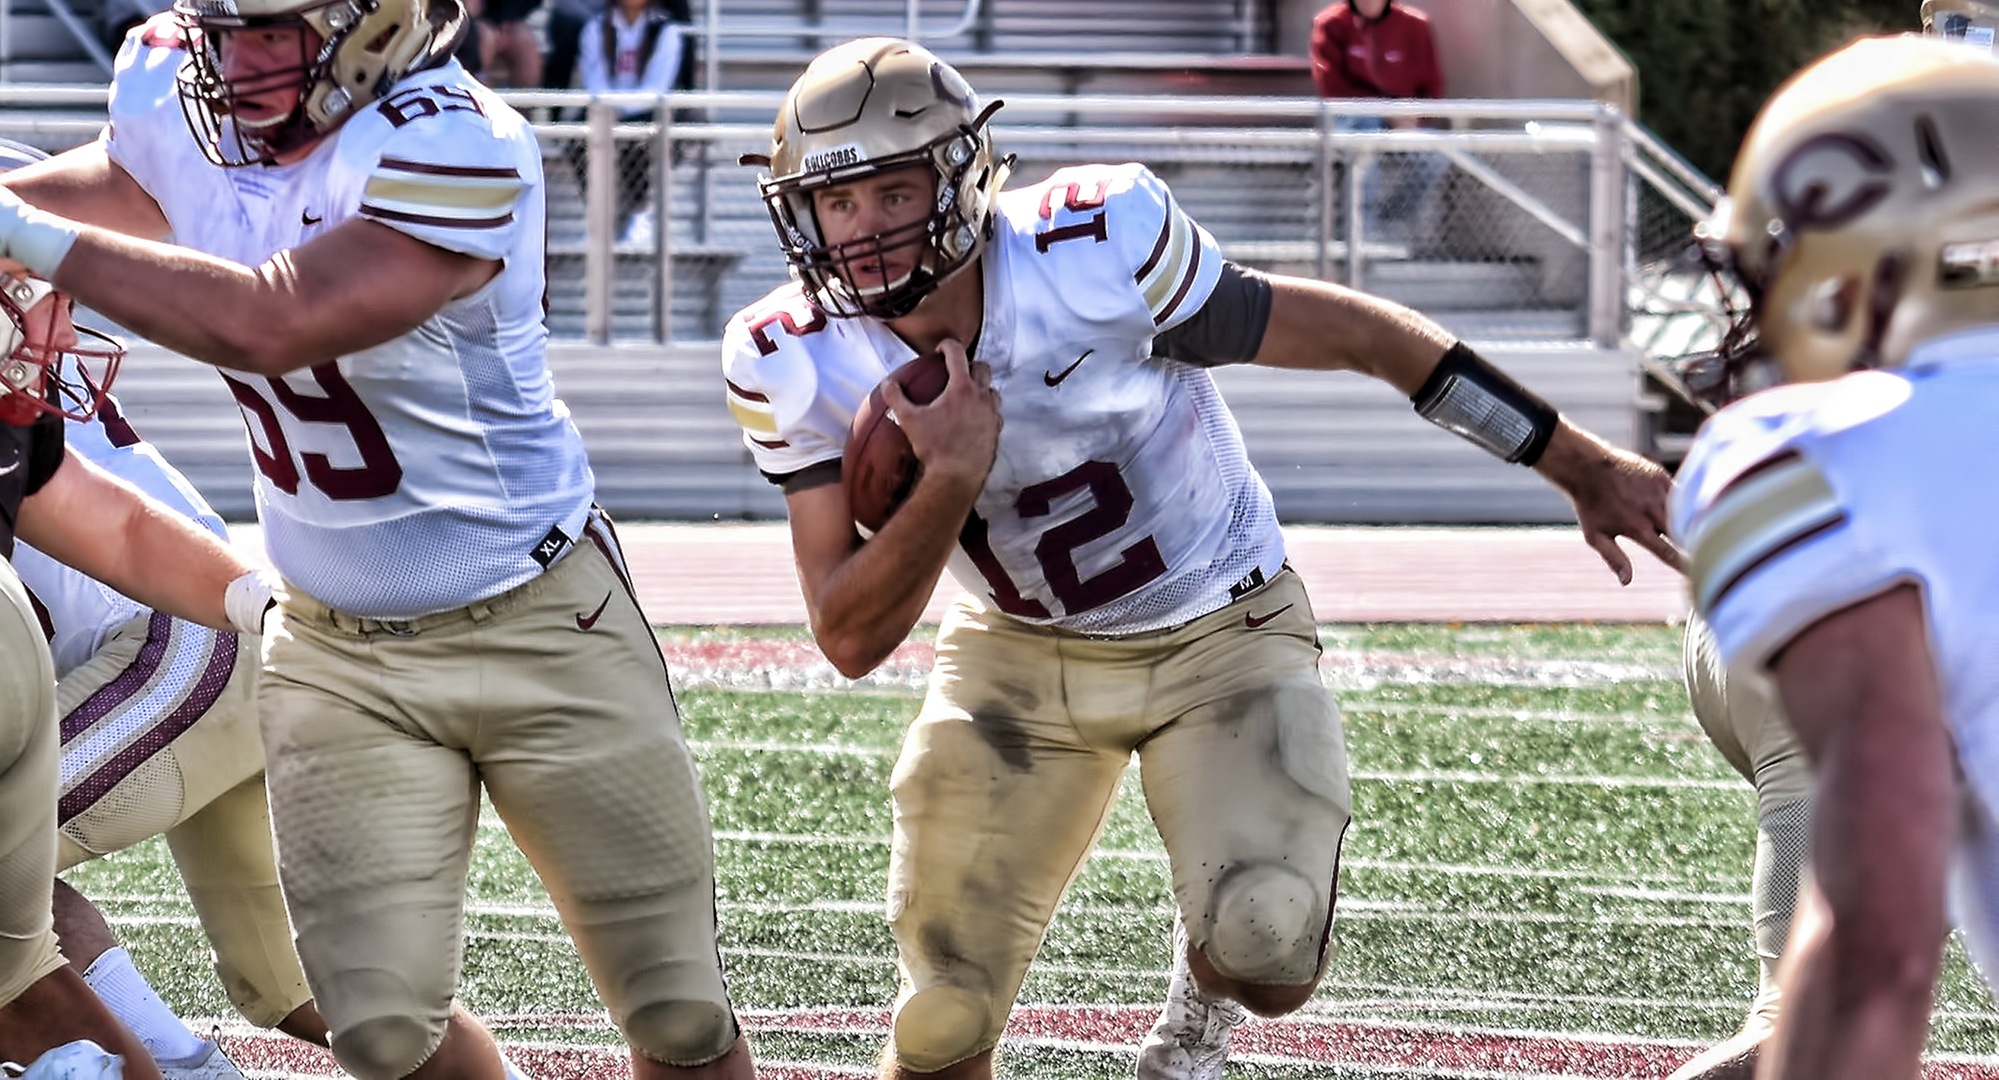 Senior quarterback Blake Kragnes breaks free for a big rushing gain during the Cobbers' win at Hamline. He finished with a season-high 101 yards on the ground.